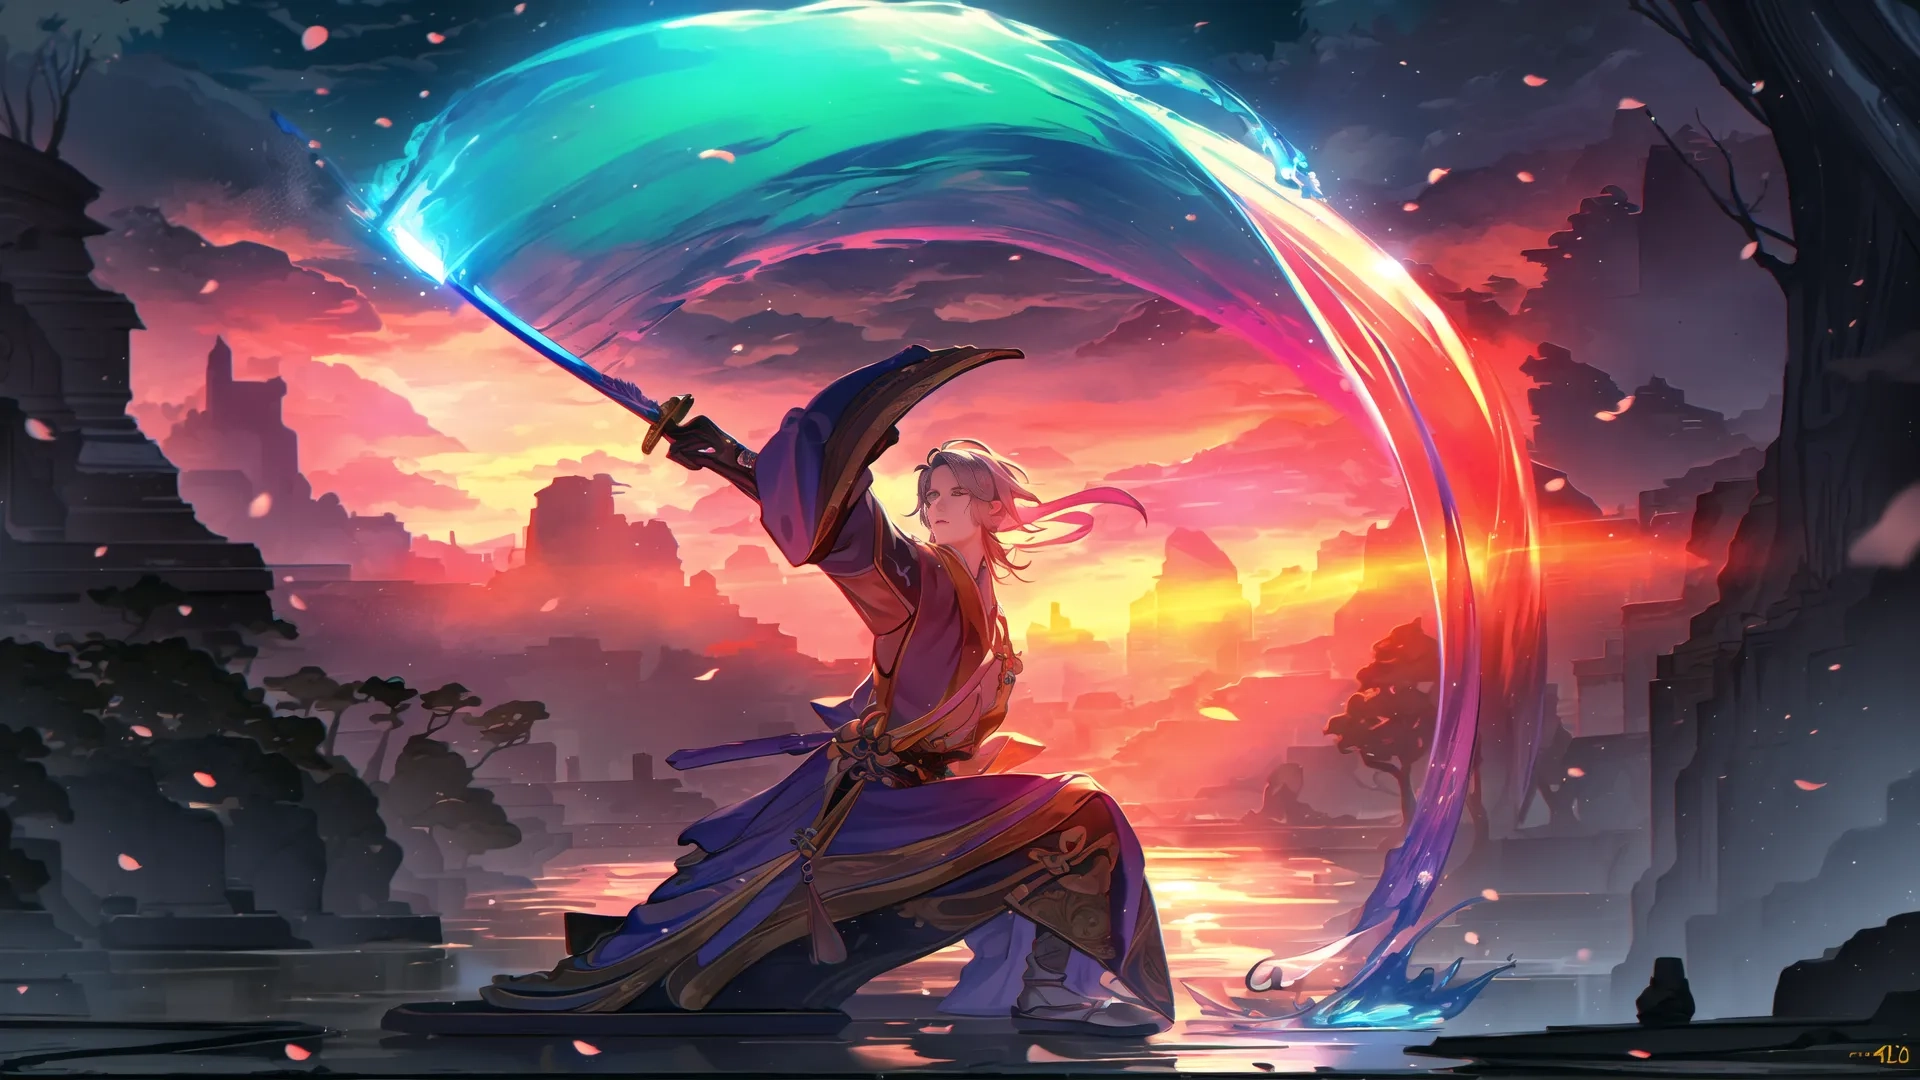 a guy with a sword about to get his own shot taken with a sunset background and a water way behind him all in anime, legend of fantasy image
